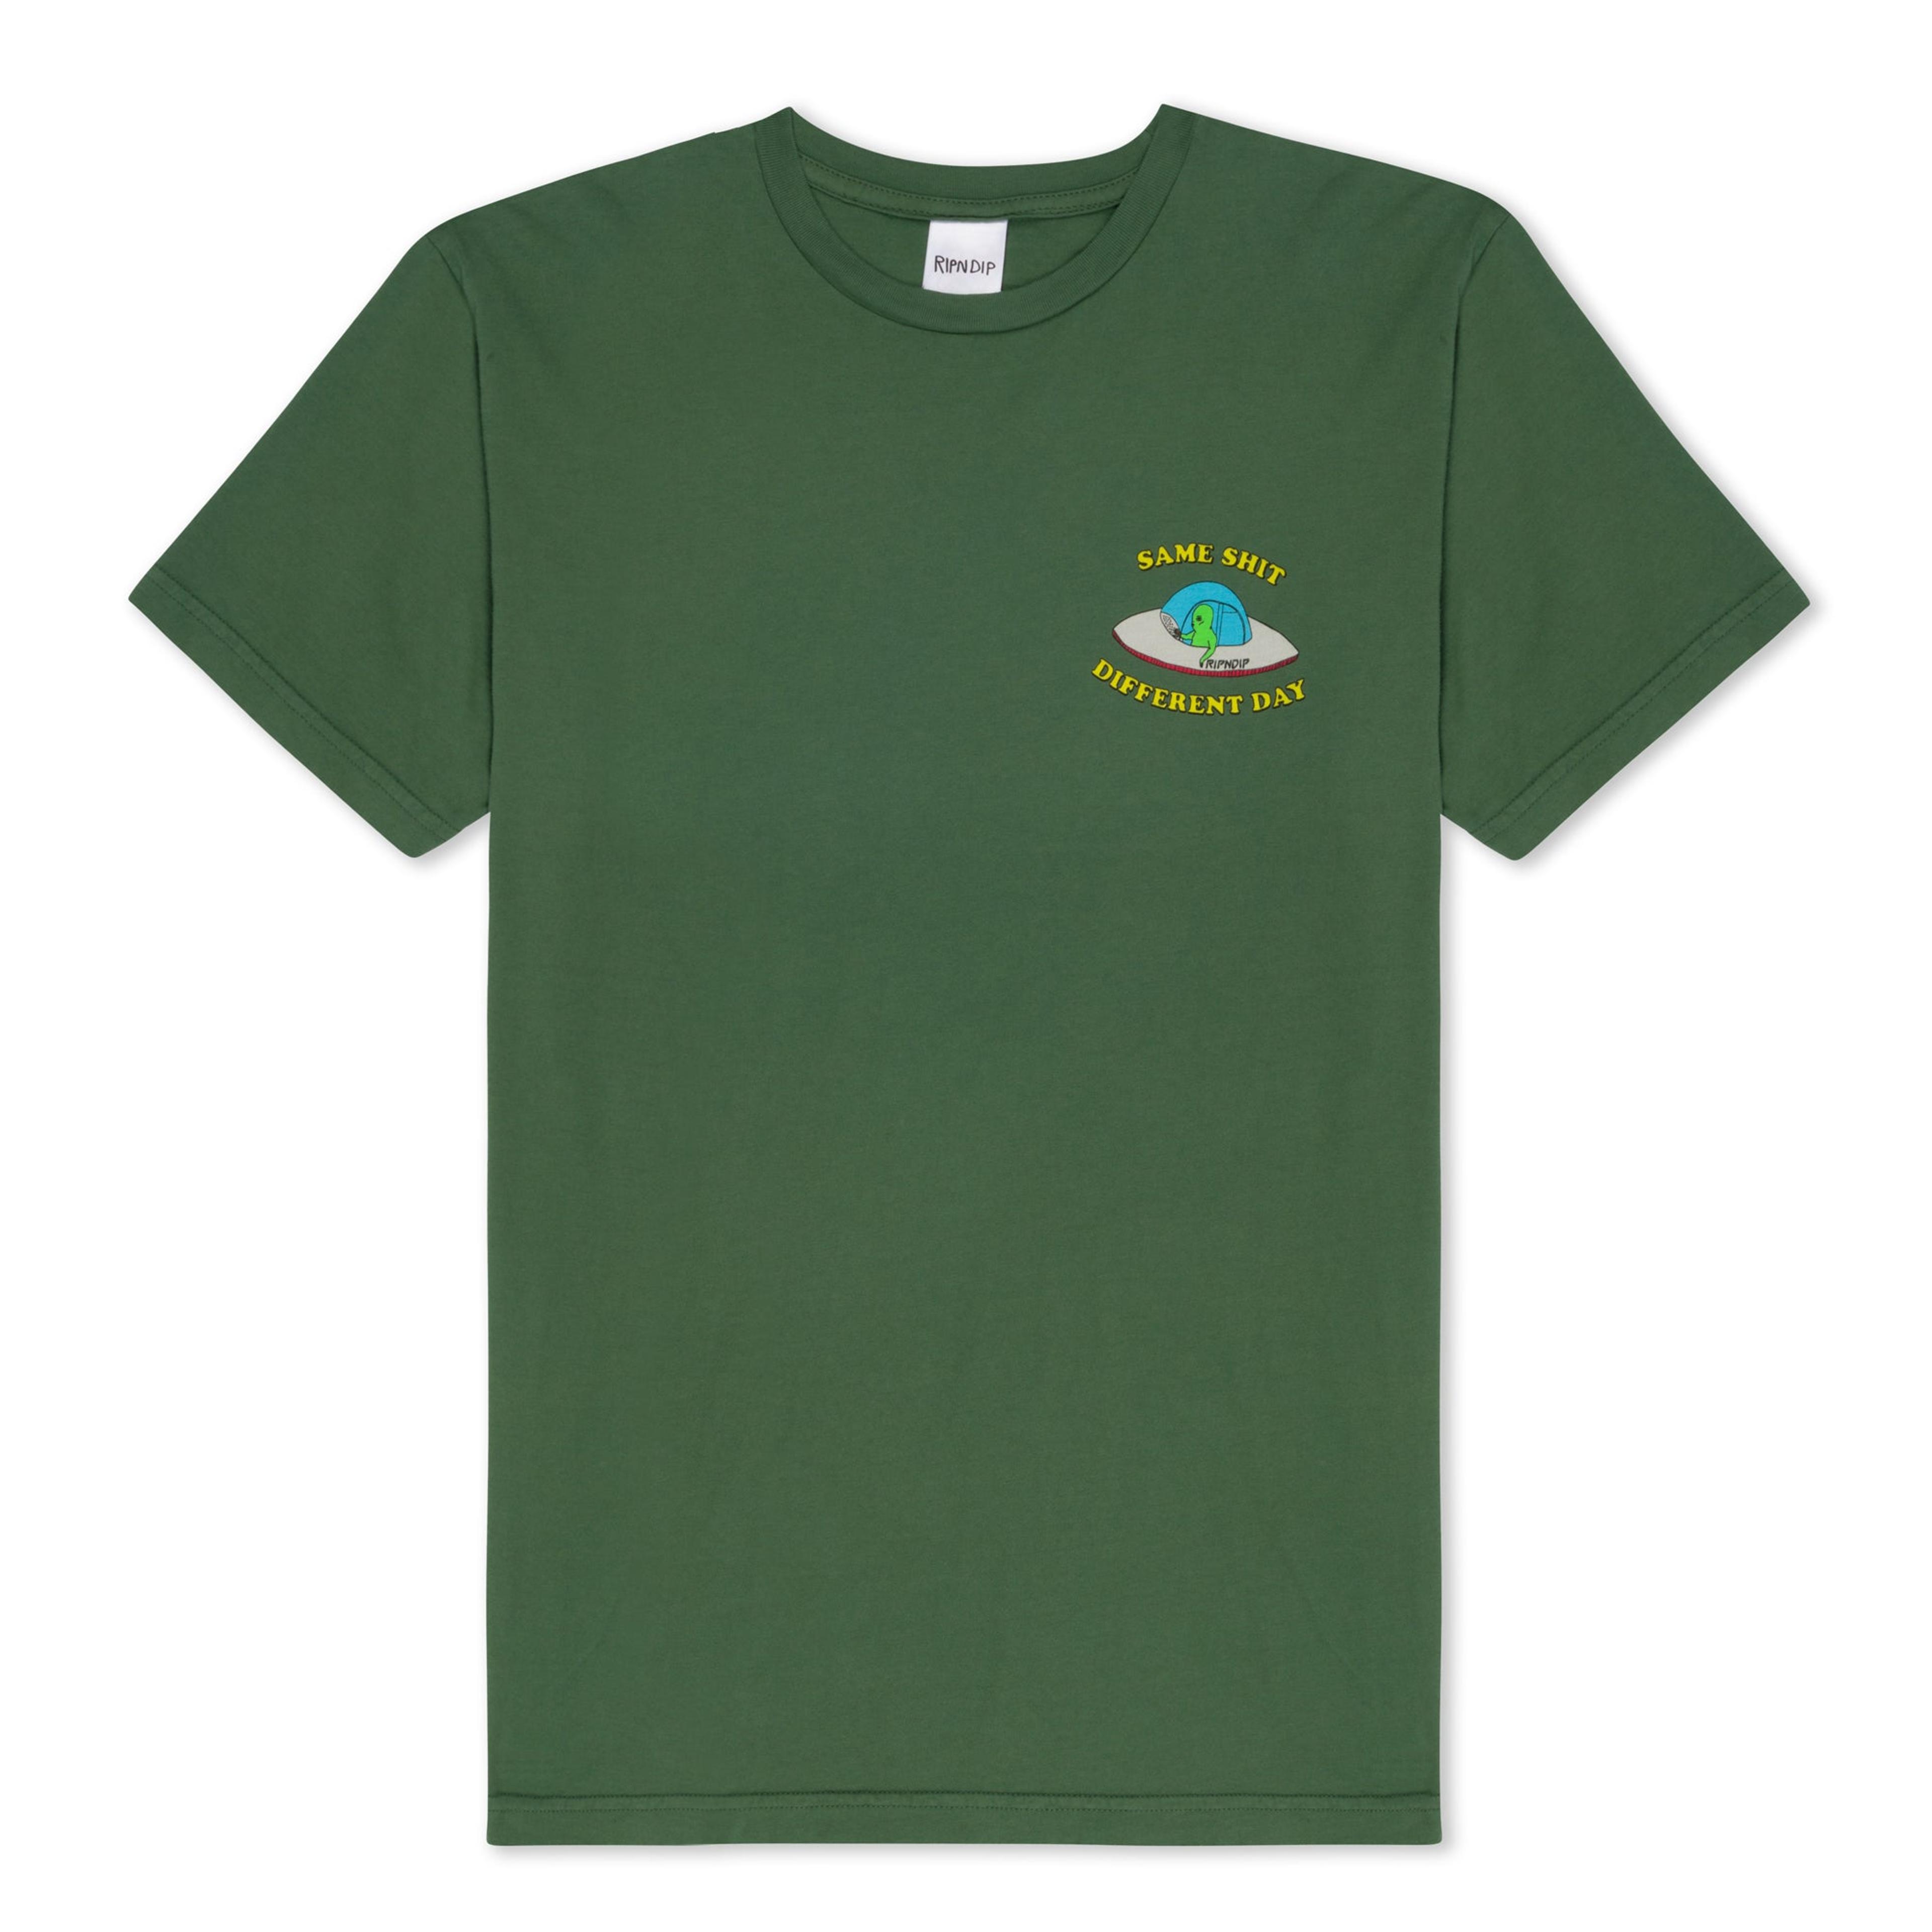 Alternate View 2 of Same Shit Different Day Tee (Olive)